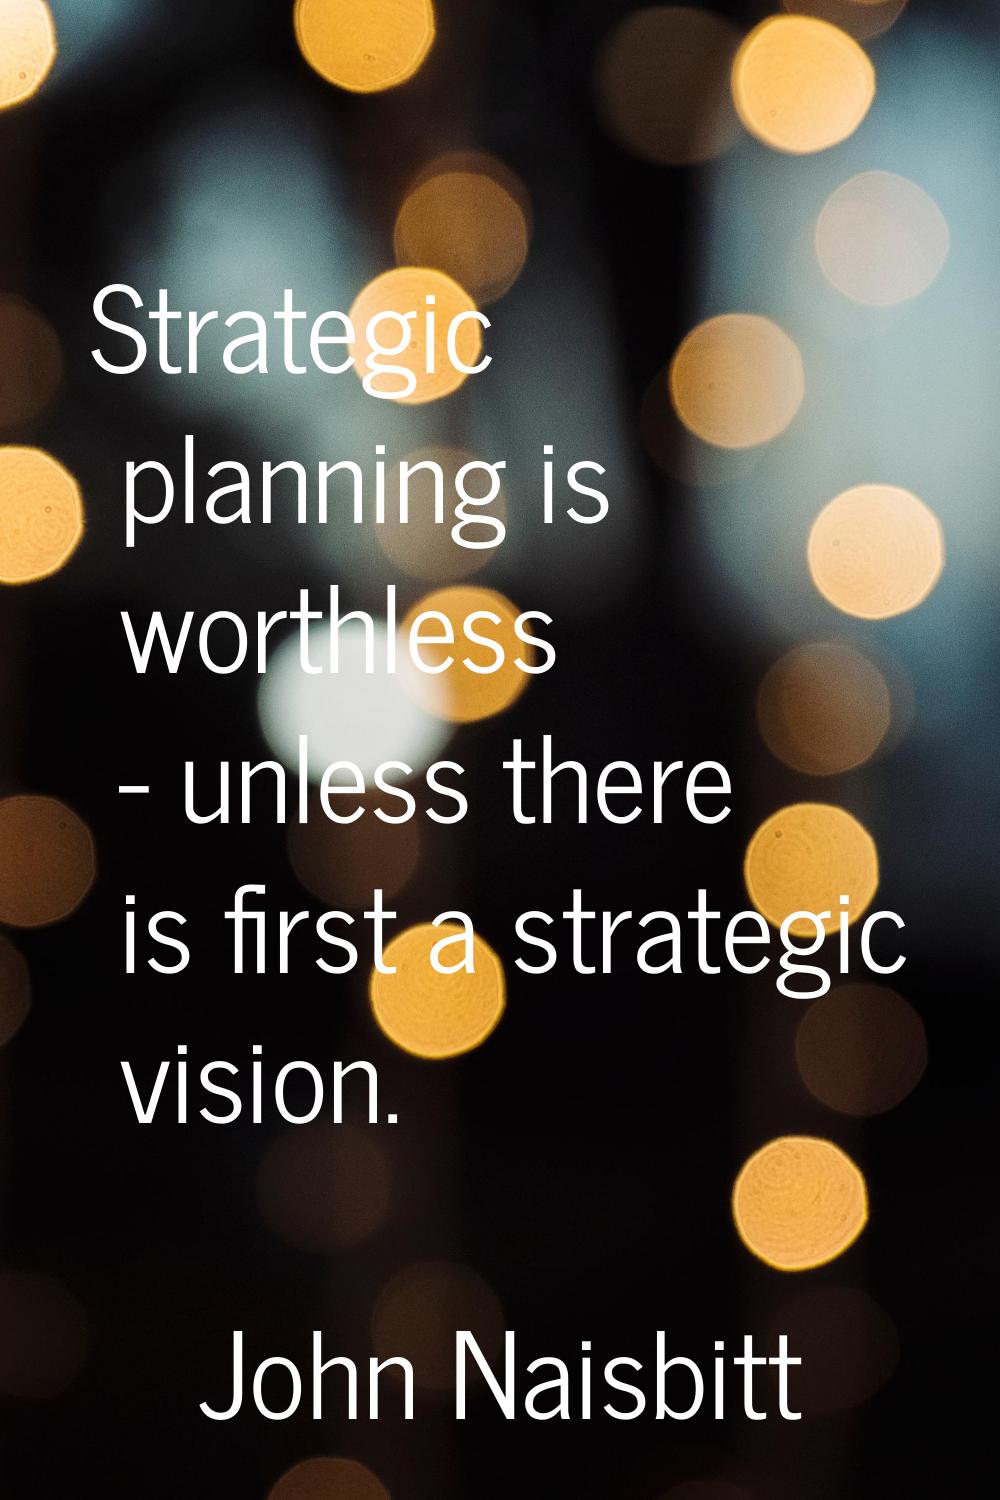 Strategic planning is worthless - unless there is first a strategic vision.